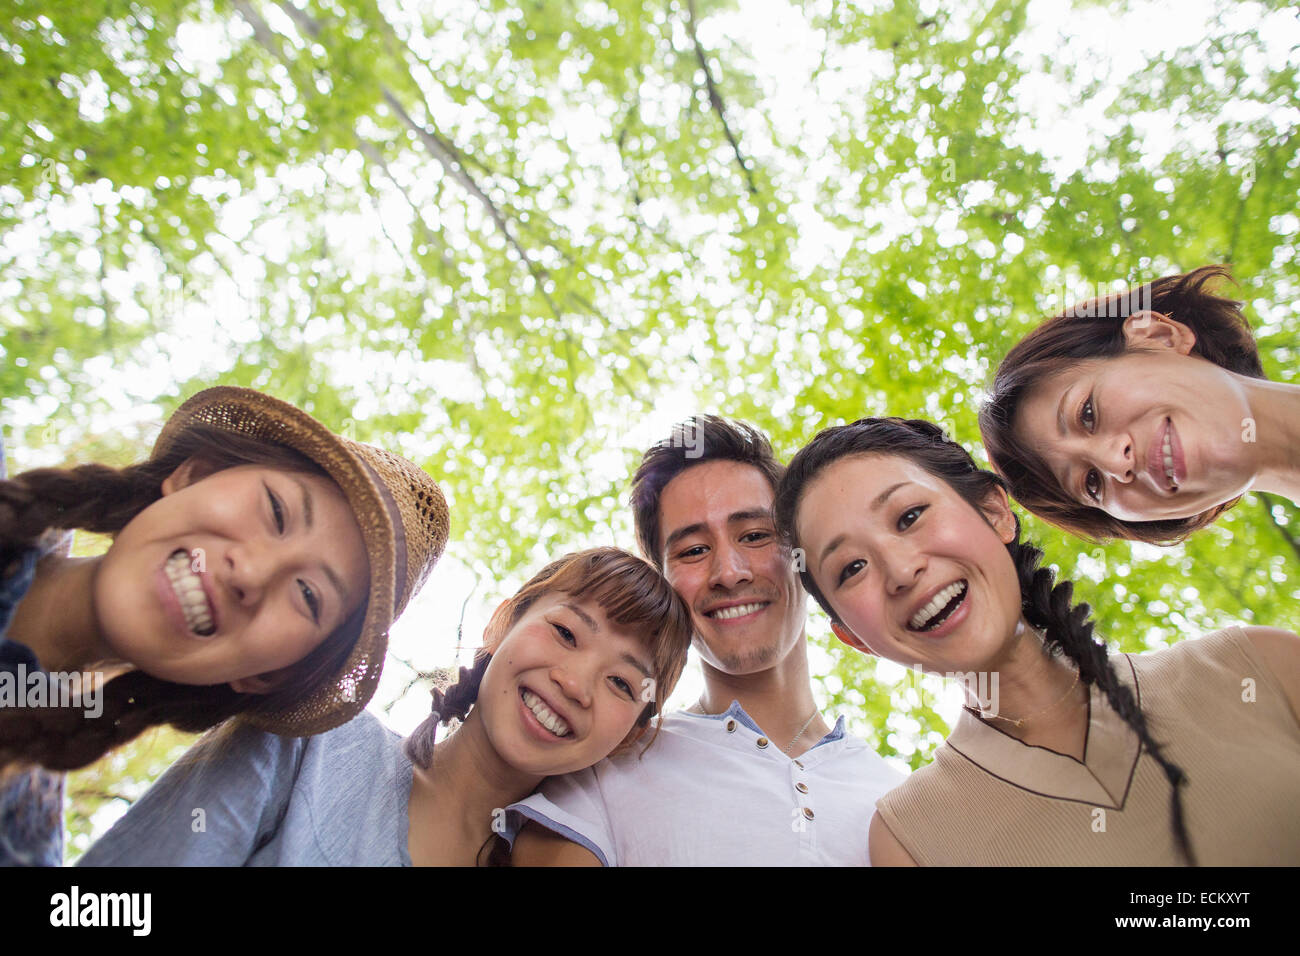 Group of friends at an outdoor party in a forest. Stock Photo